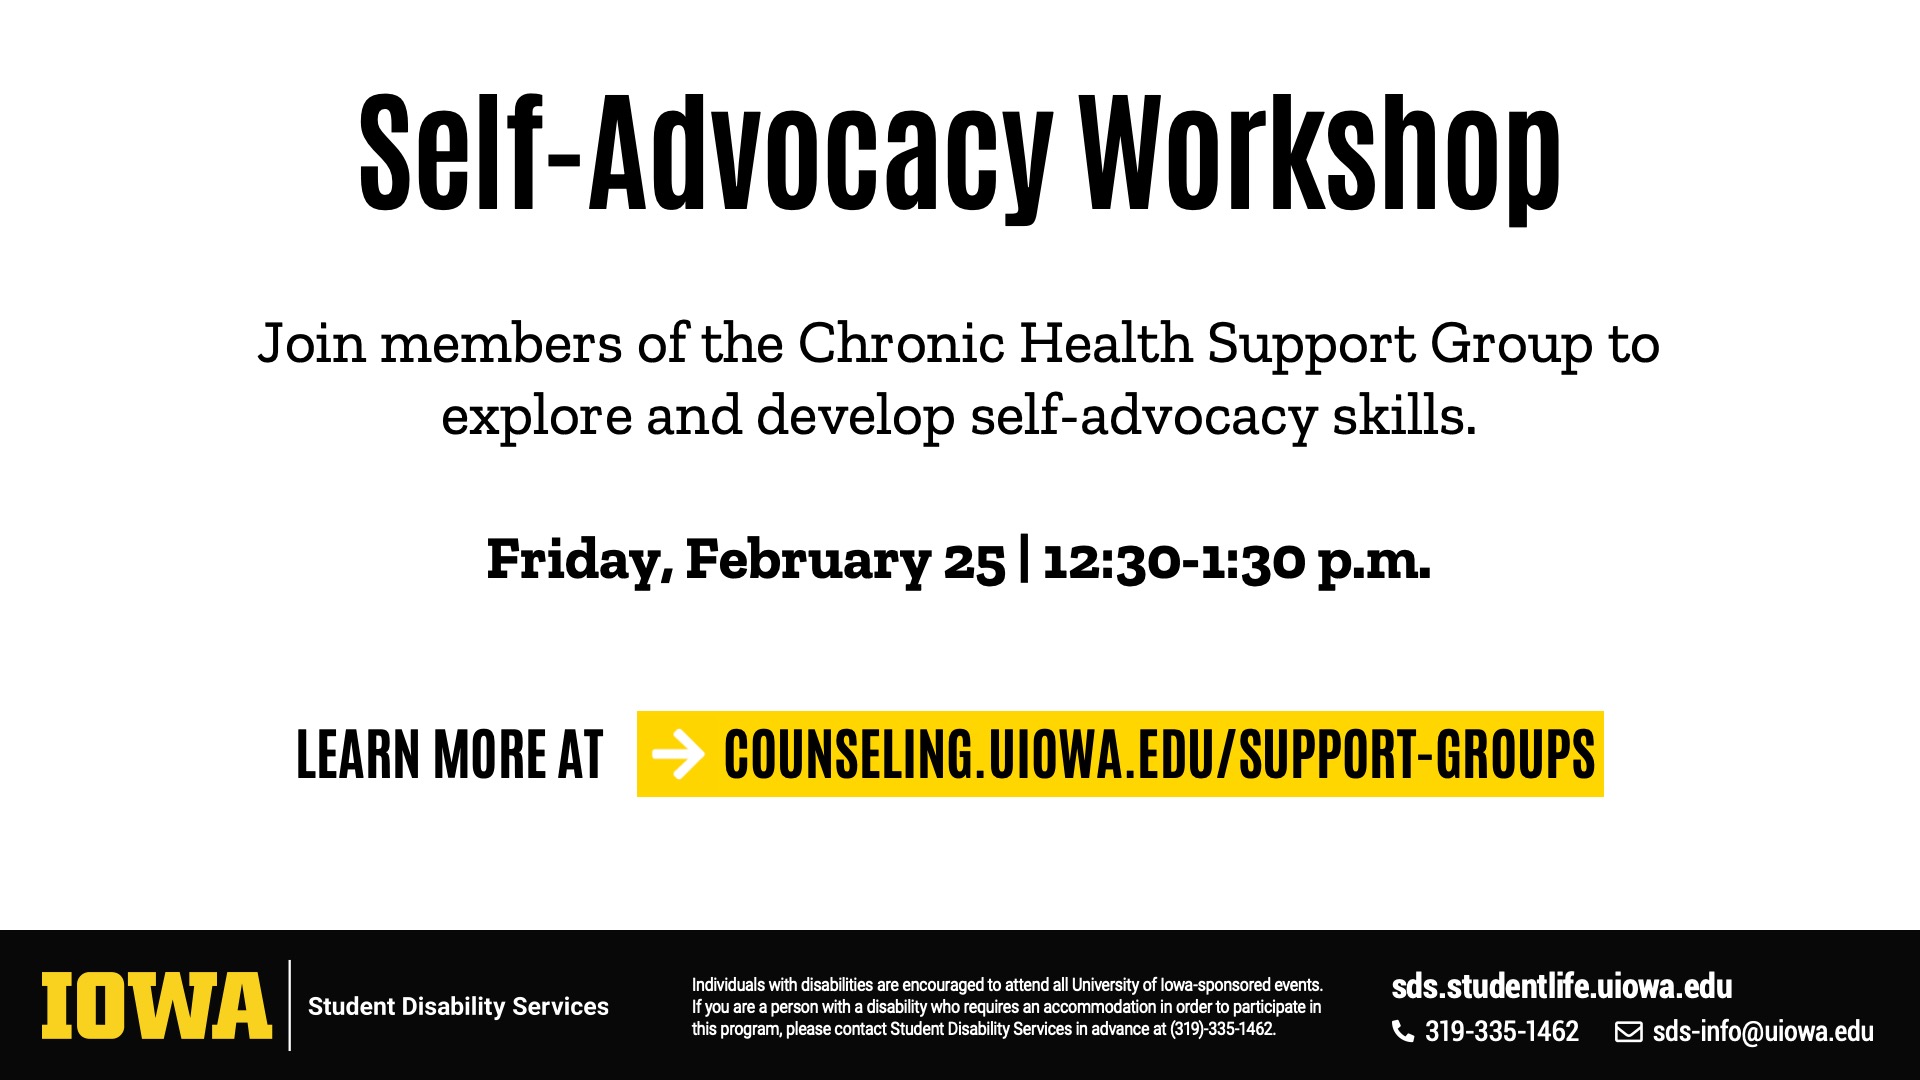 Self-Advocacy Workshop Join members of the chronic health support group to explore and develop self-advocacy skills. Friday, Feb 25th from 12:30-1:30pm  